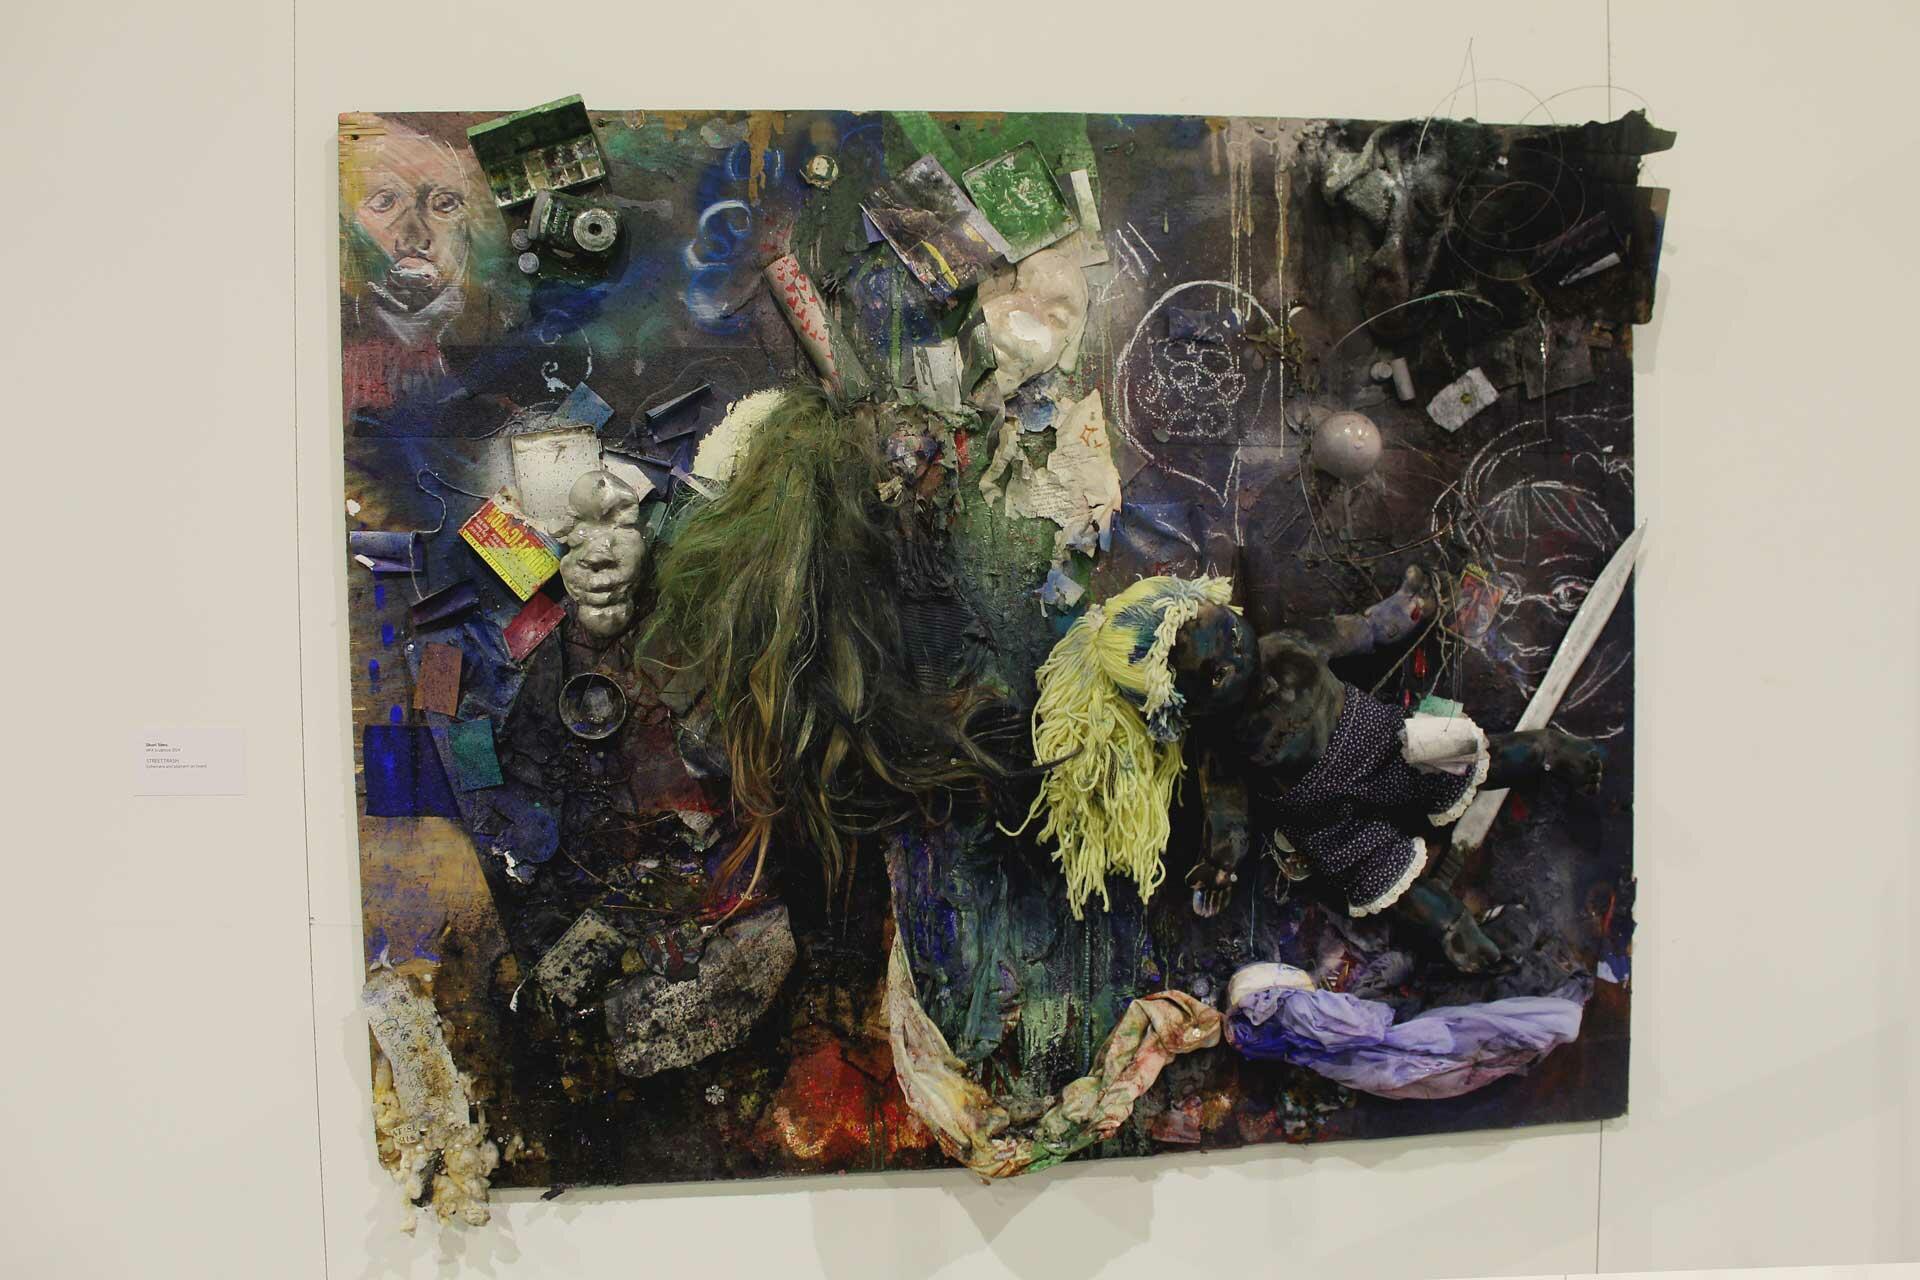 The image depicts a large painting, with dark pigment around the edges and more greenish and blueish shades of pigment towards the middle. To the center-right and upper-left of the painting, there are drawings of faces, and many objects and ephemera attached to the board as well, including a sword, cassette tapes and cases, a small digital camera, a glass orb, a small watercolor compact, and a fabric doll with blond yarn hair. 